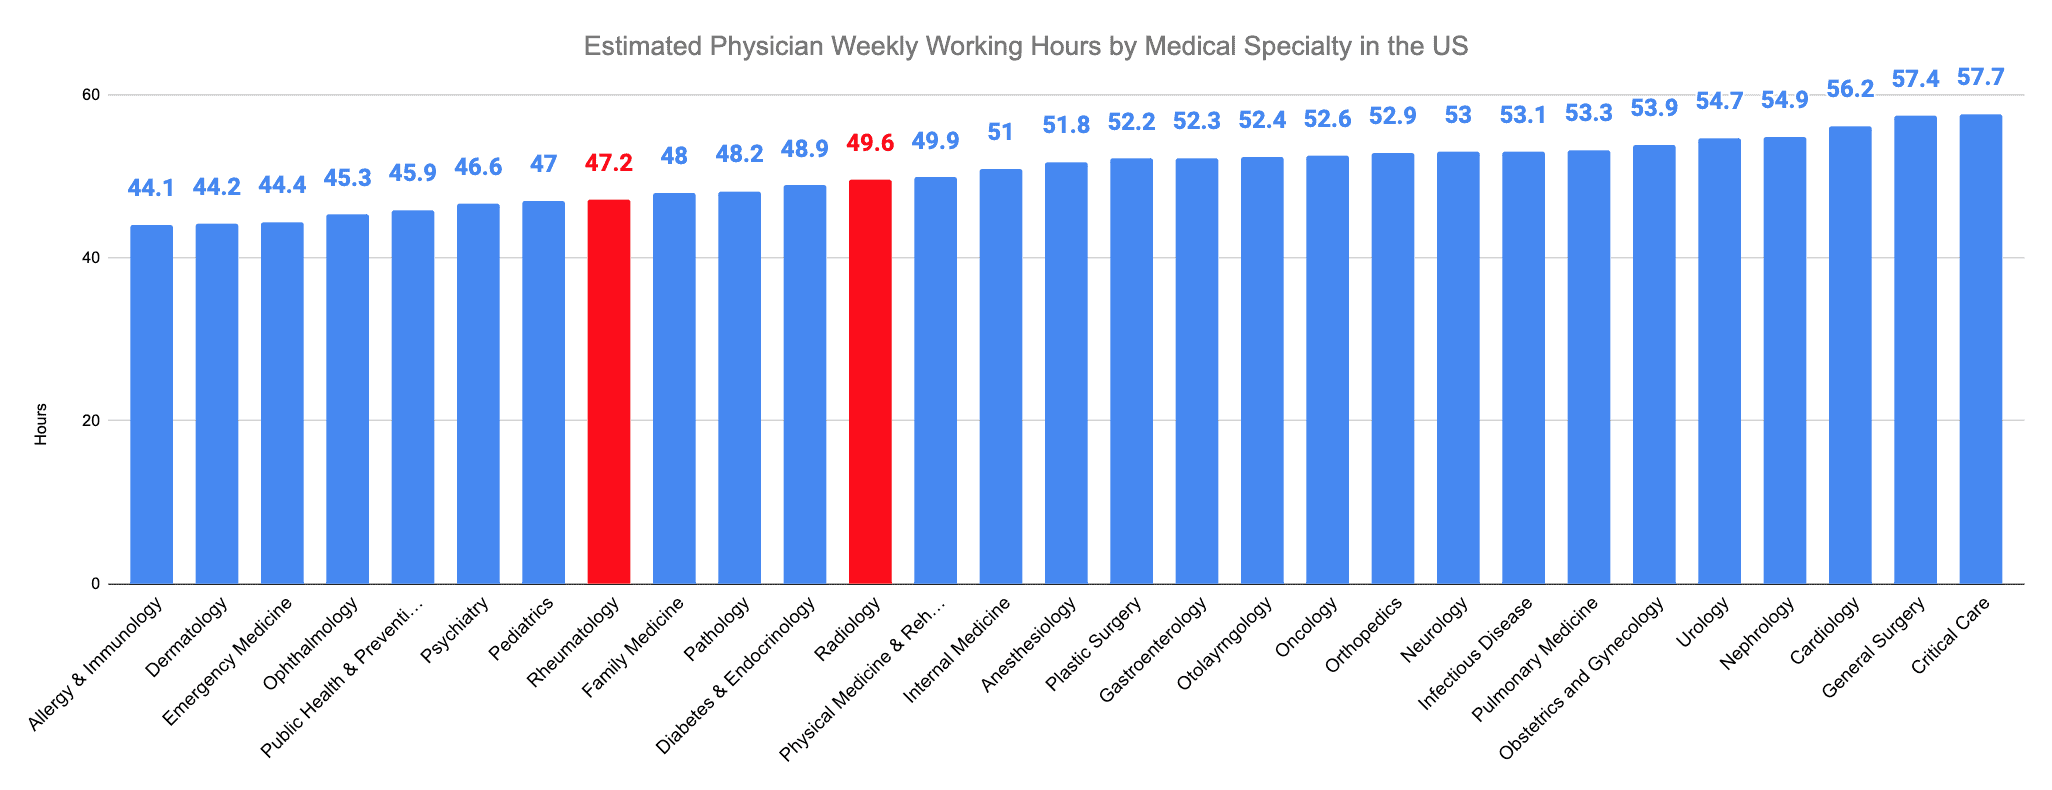 Estimated Physician Weekly Working Hours by Medical Specialty in the US